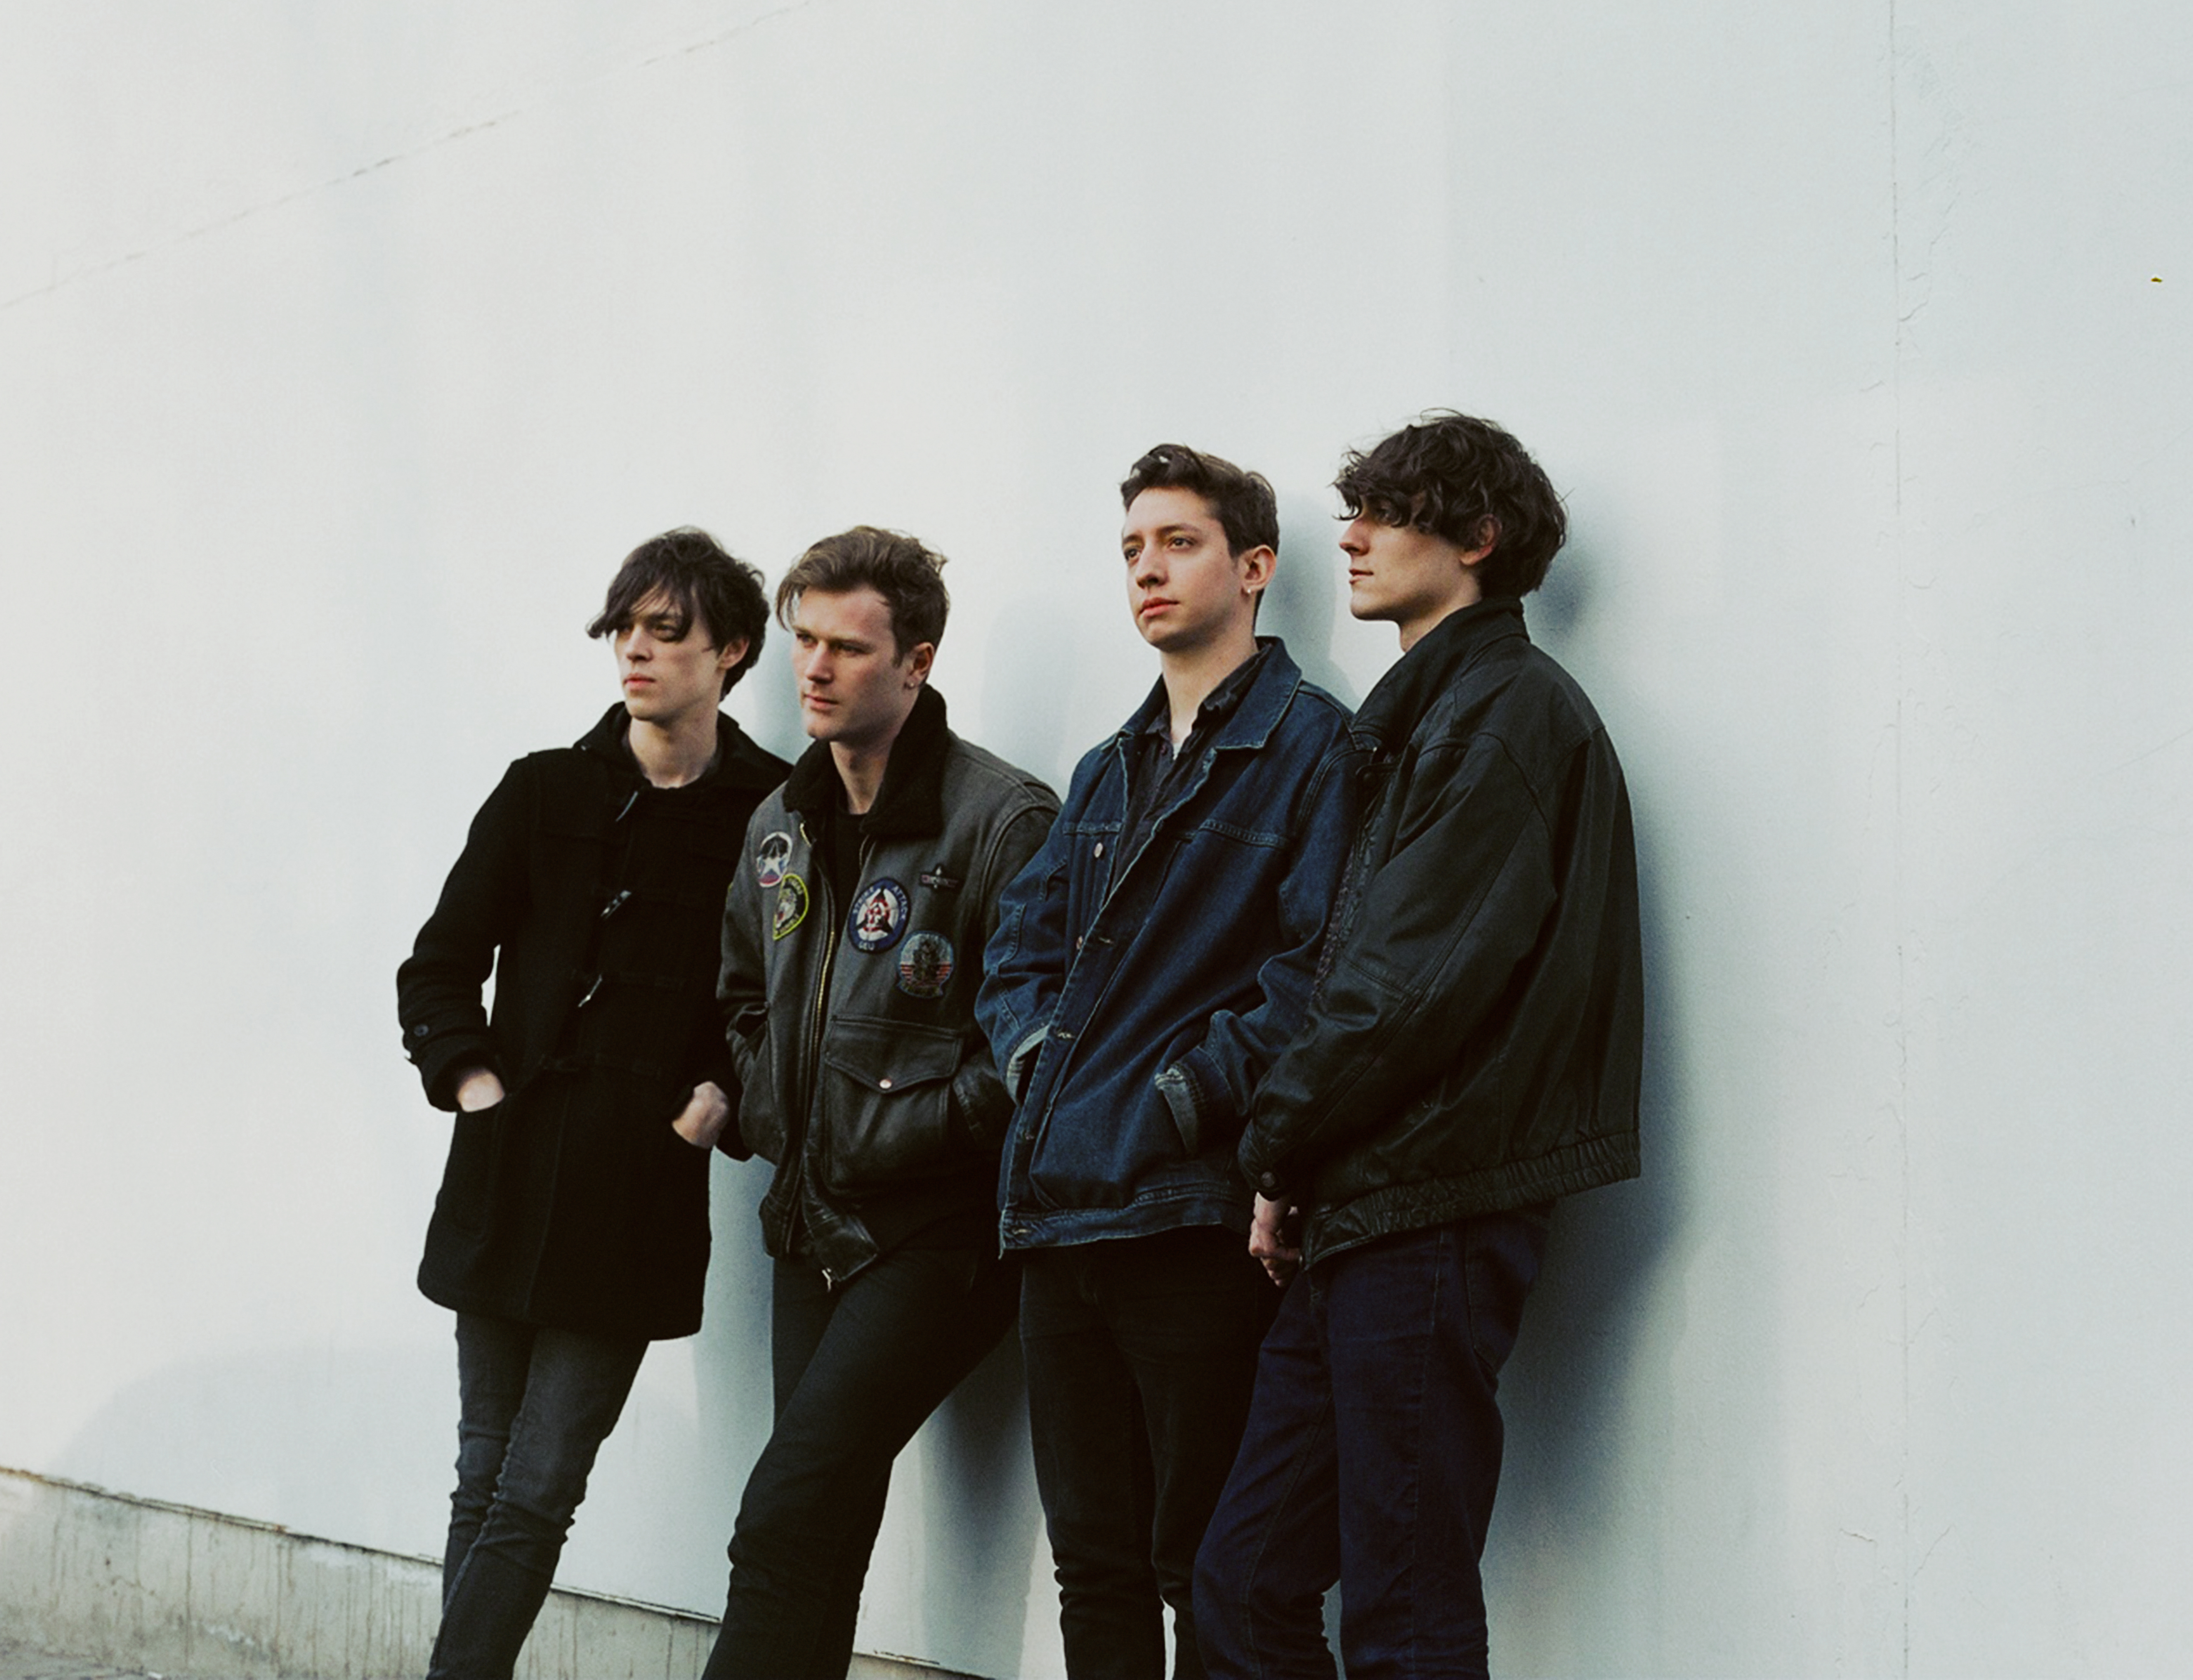 Track By Track: Gengahr on A Dream Outside